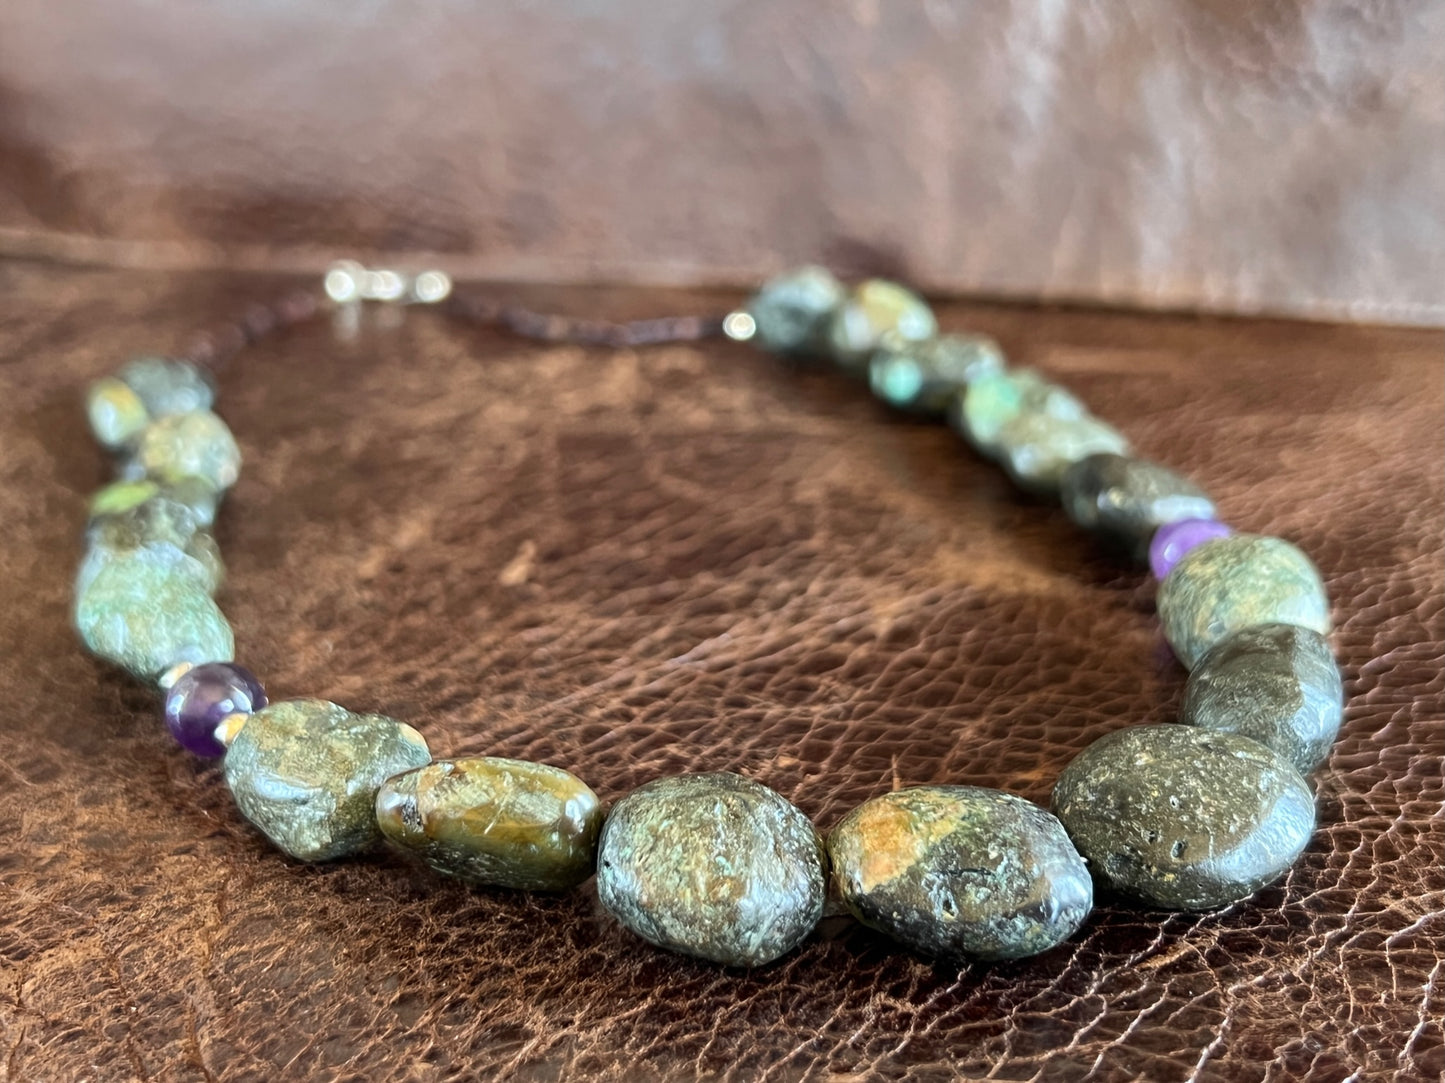 Turquoise & Amethyst Bead Necklace Sterling by Colleena Bia, Navajo